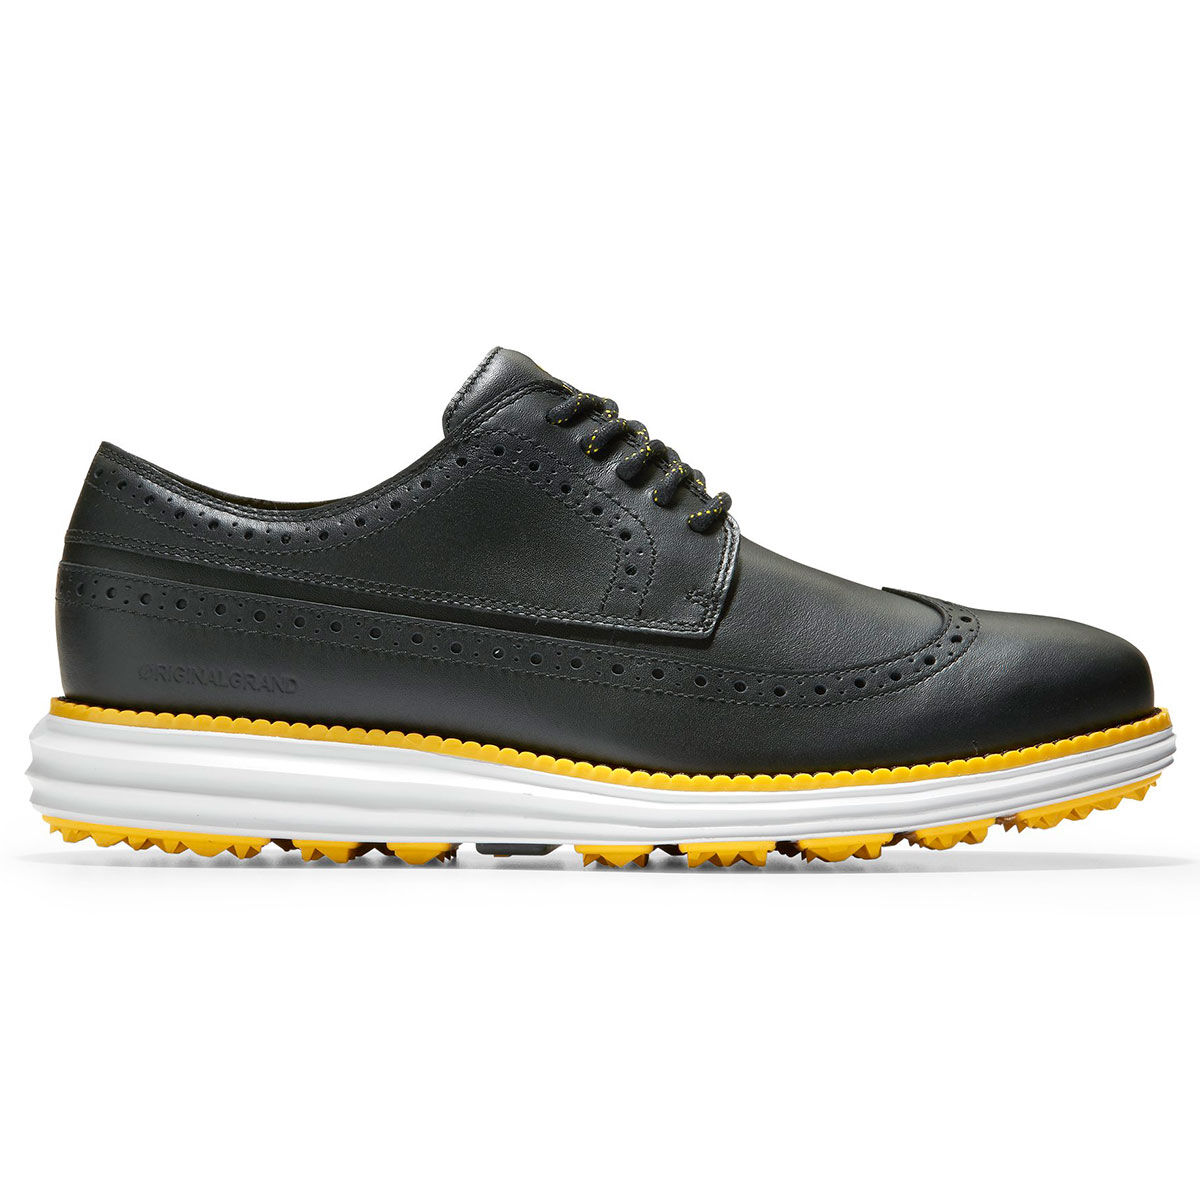 Cole Haan Mens Black and White OriginalGrand Wing Oxford Golf Shoes, Size: 10 | American Golf